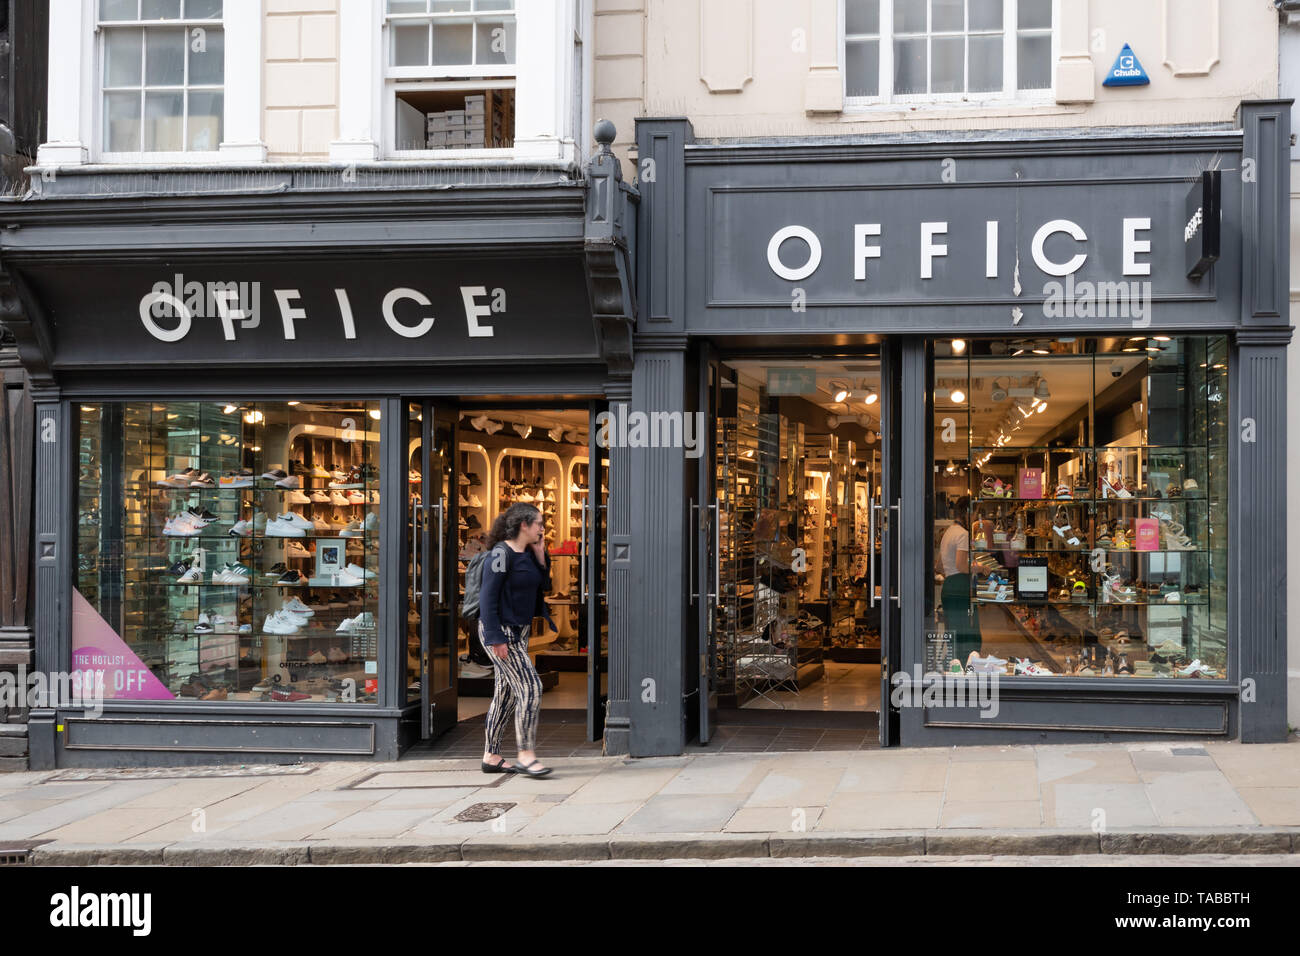 Office Shoe Shop High Resolution Stock Photography and Images - Alamy